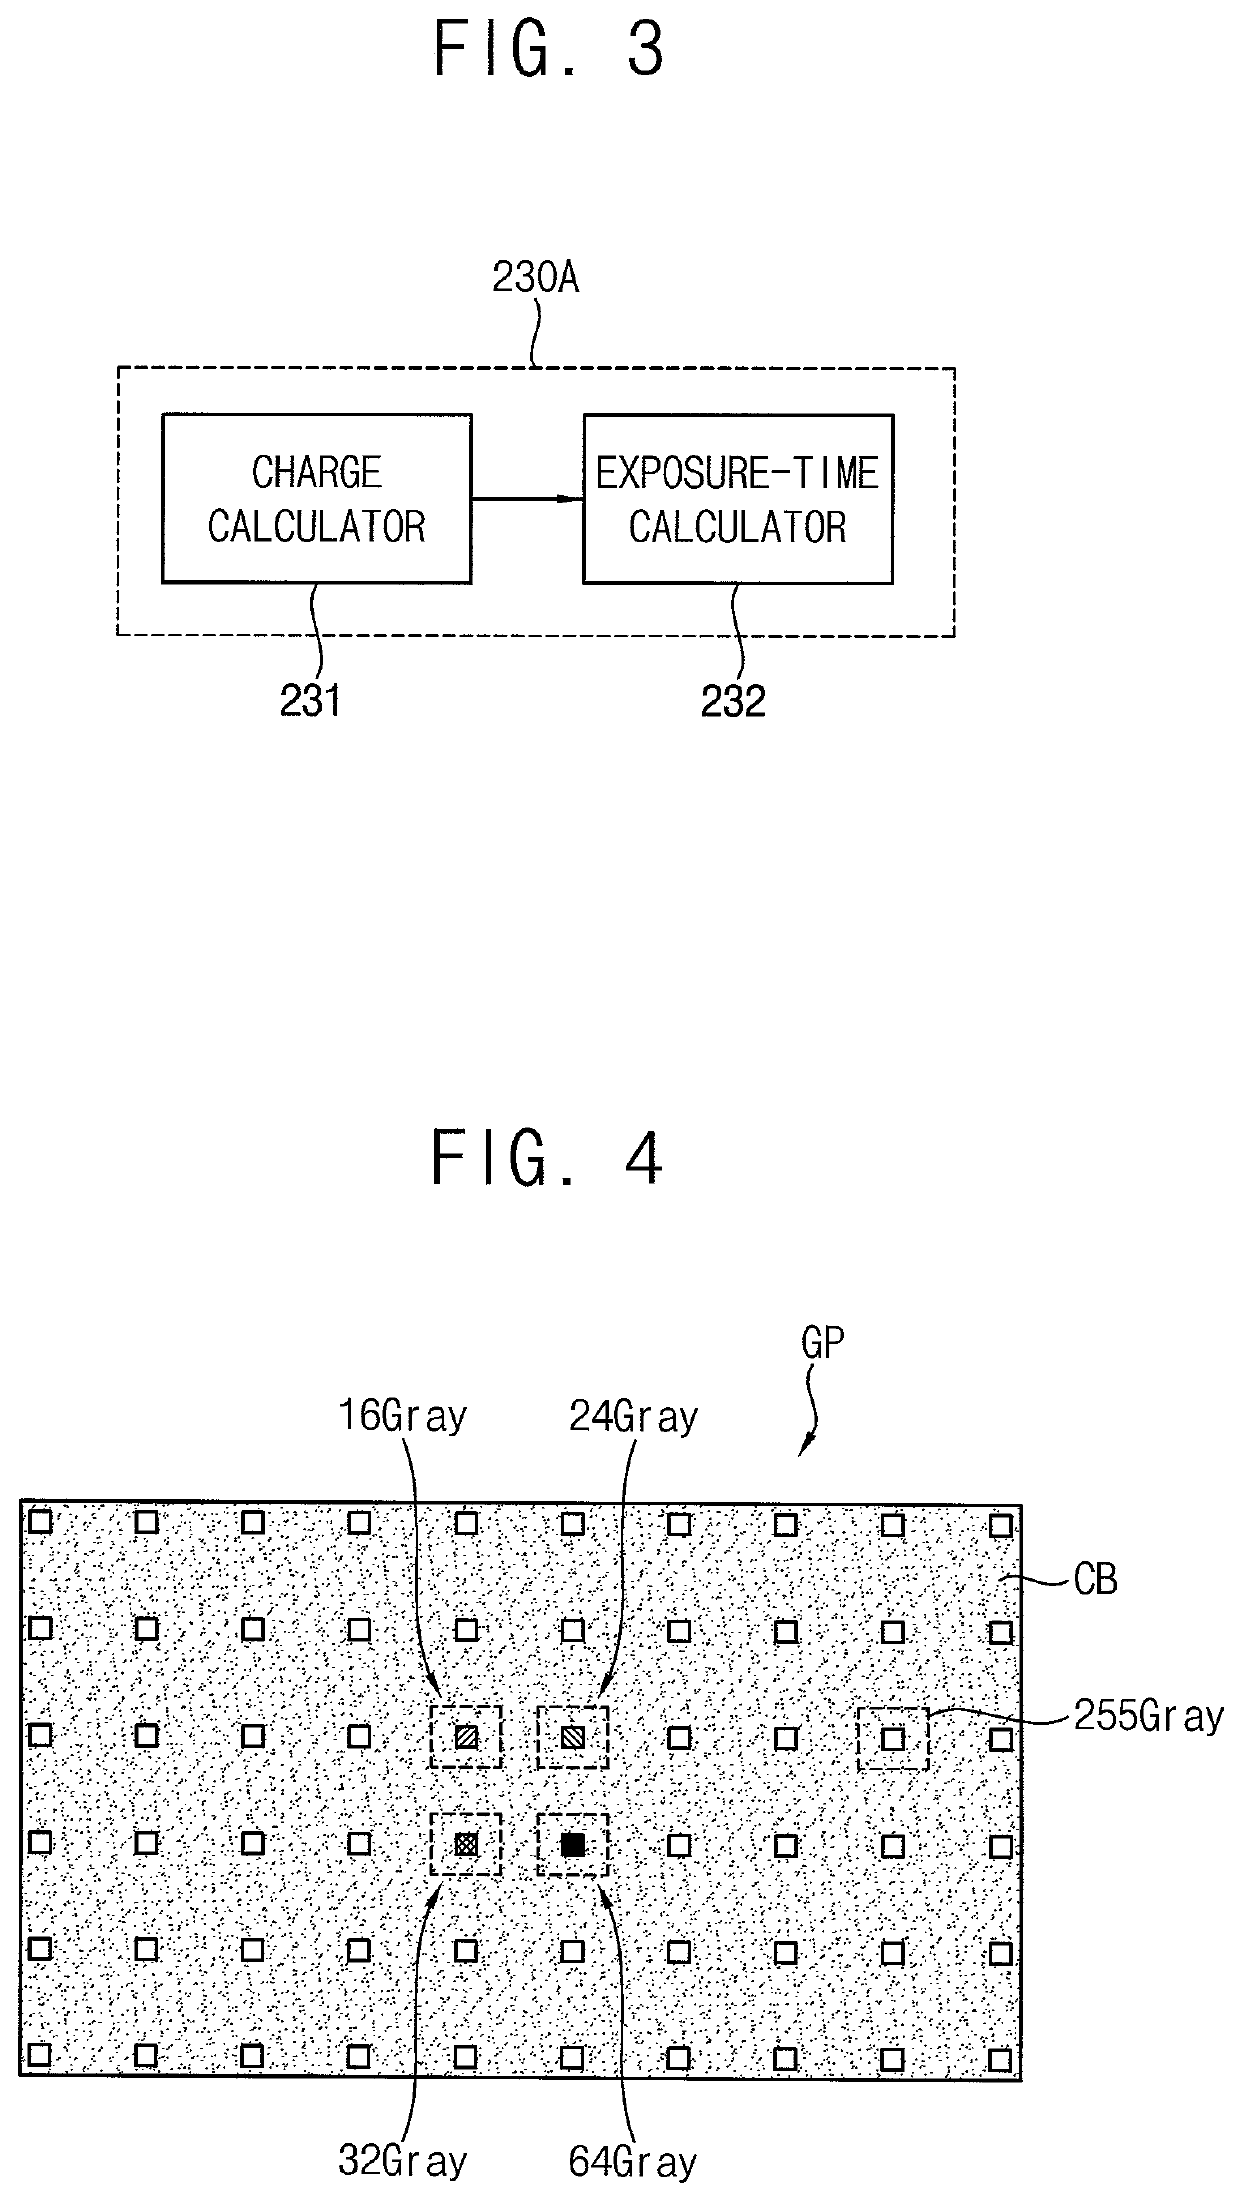 Vision inspection apparatus and a method of driving the same